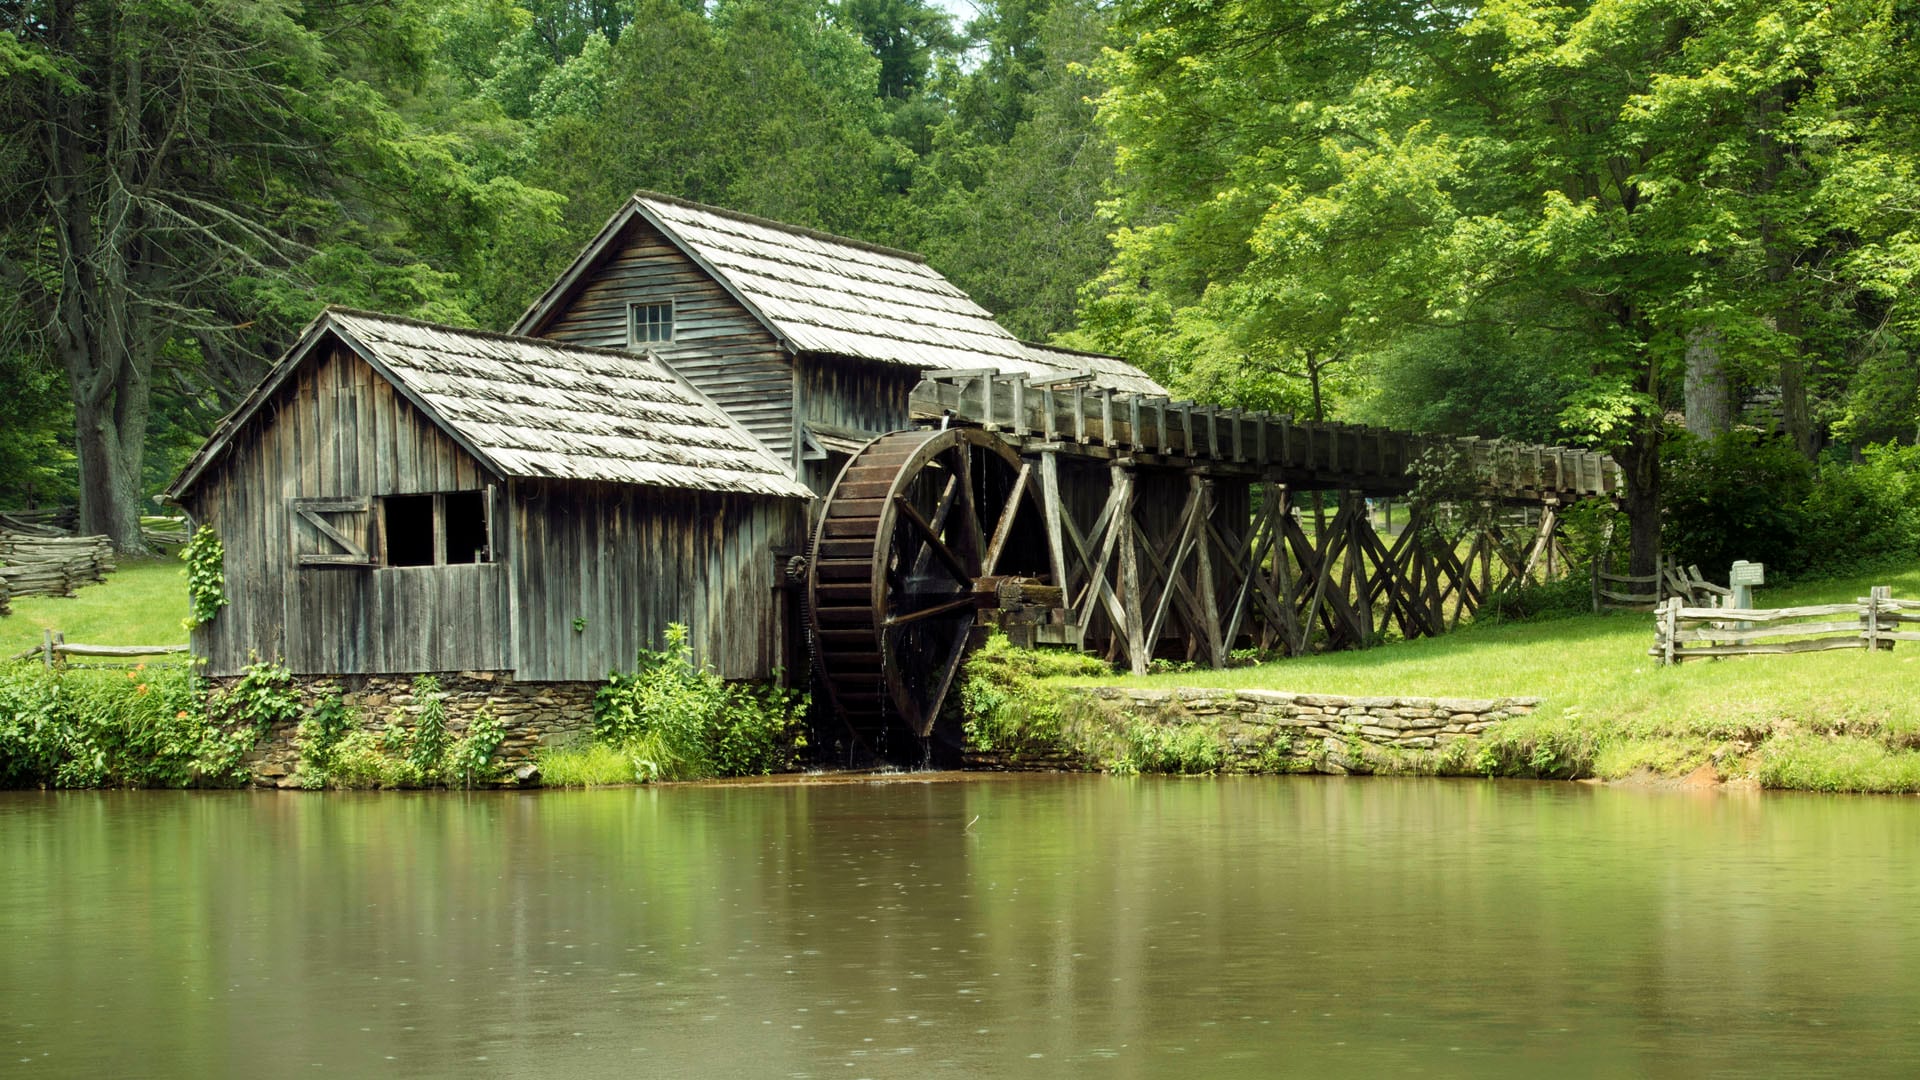 Built by Edwin Boston Mabry around 1910, Mabry Mill is a historic grist mill along the Blue Ridge Parkway. The mill is just a 25-minute drive from Floyd, Virginia.